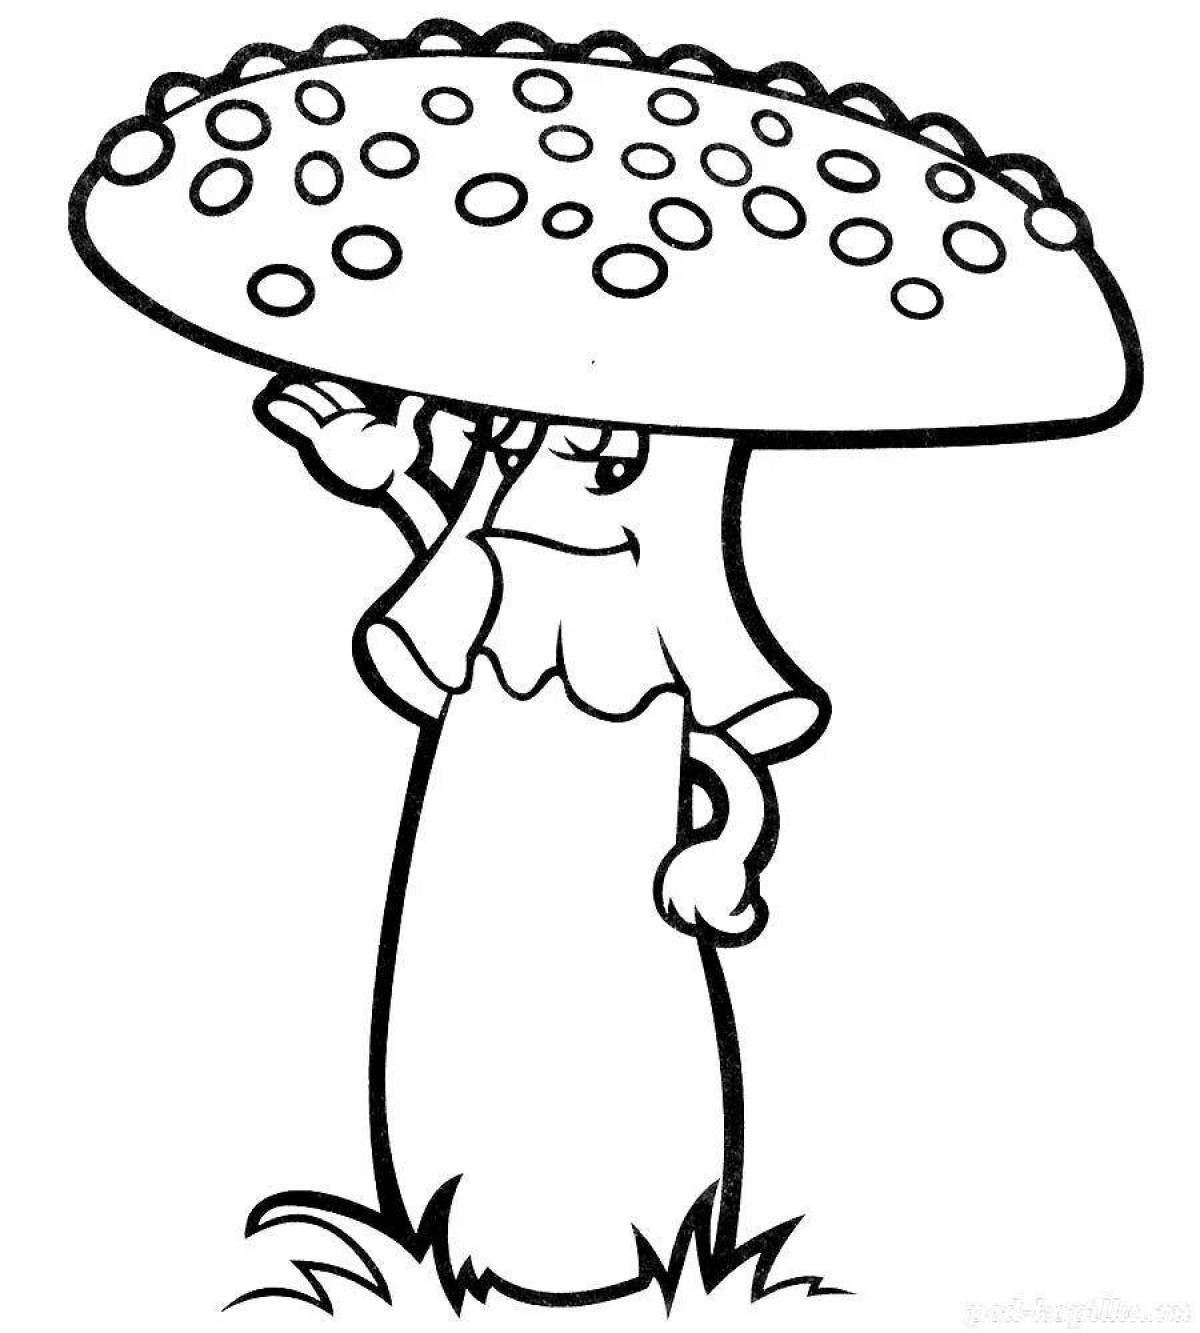 Bright coloring fly agaric